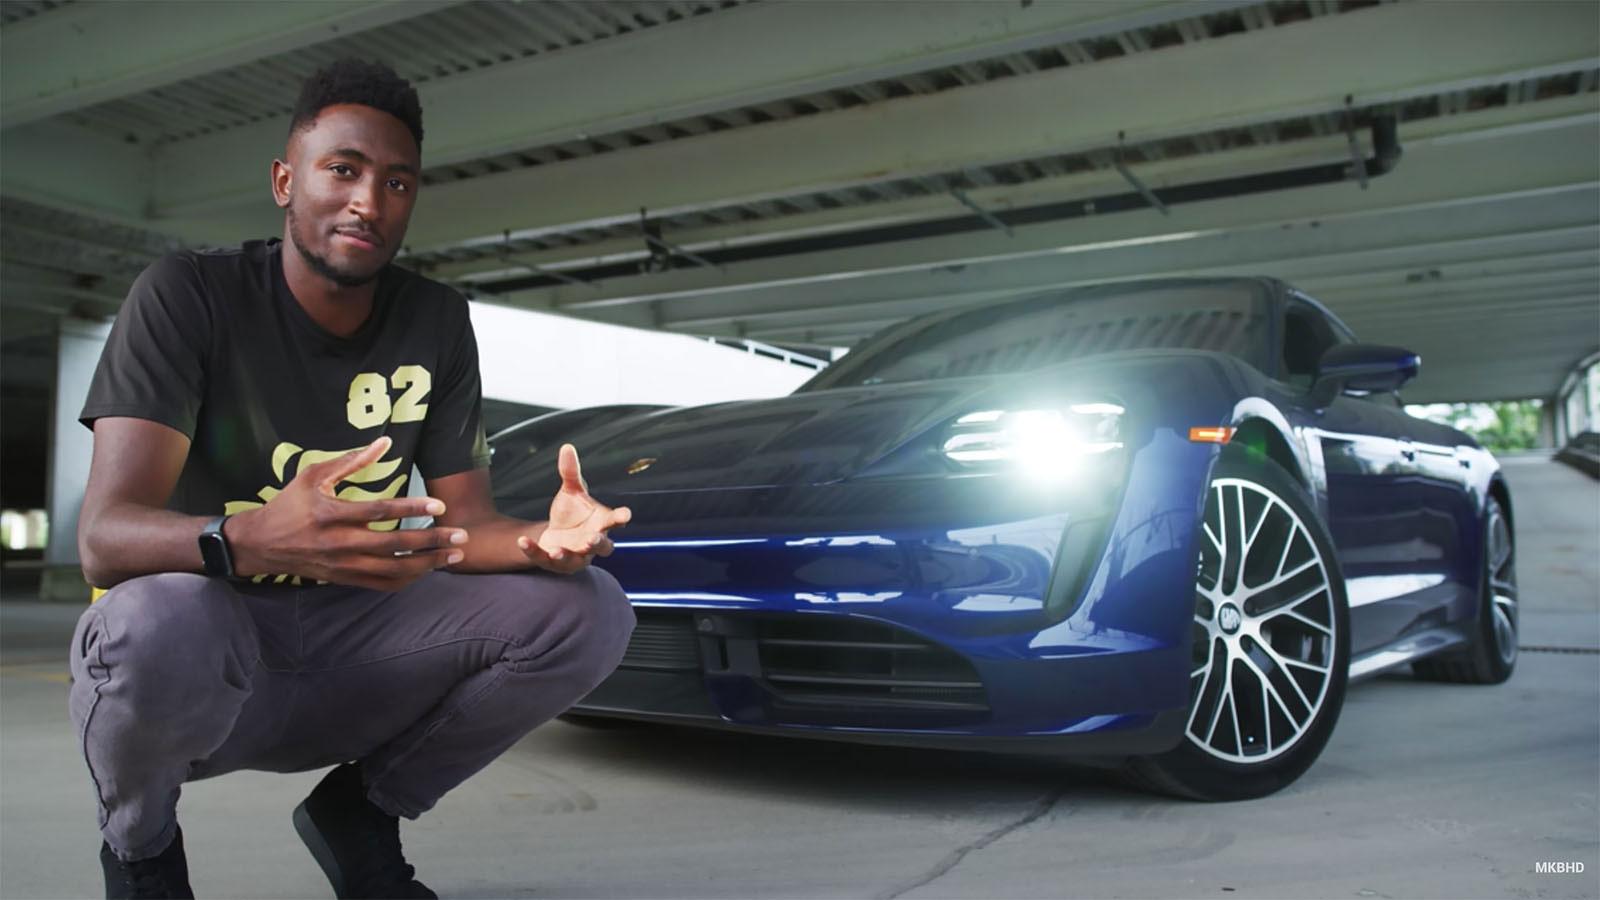 Marques Brownlee crouching in front of carYouTube: Marques Brownlee